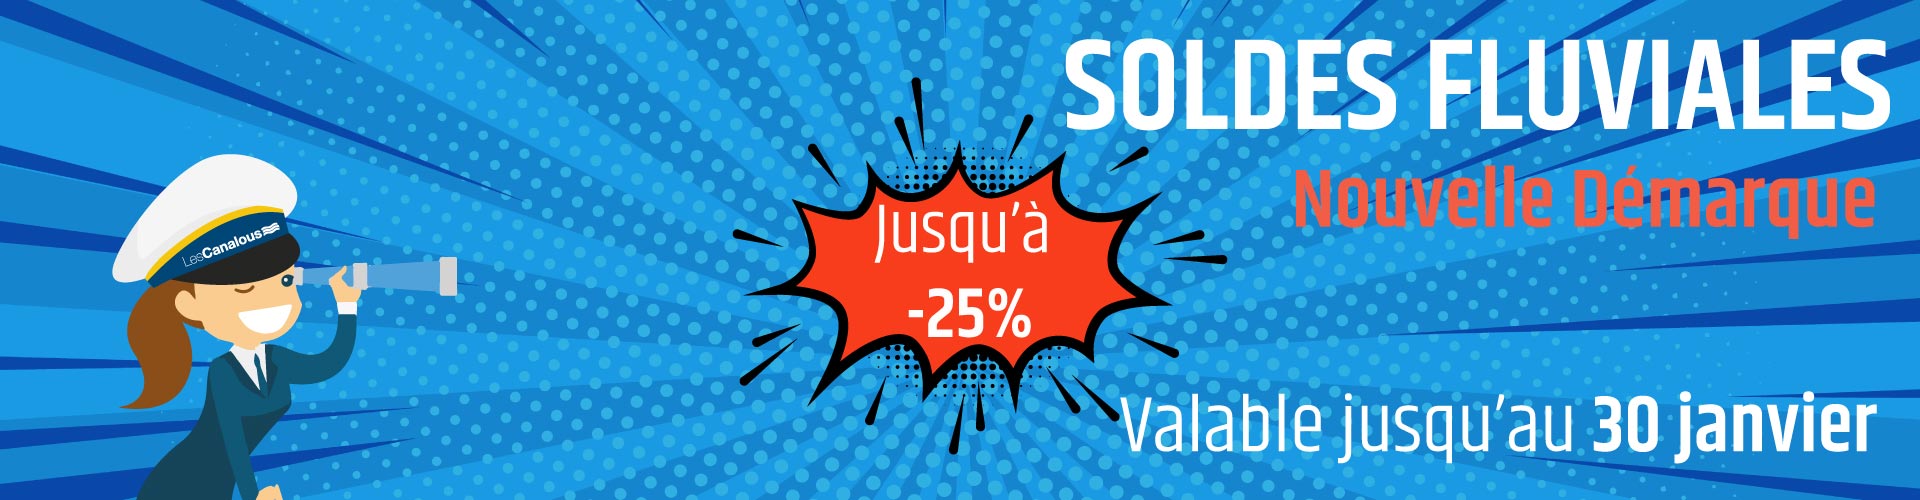 soldes fluviales